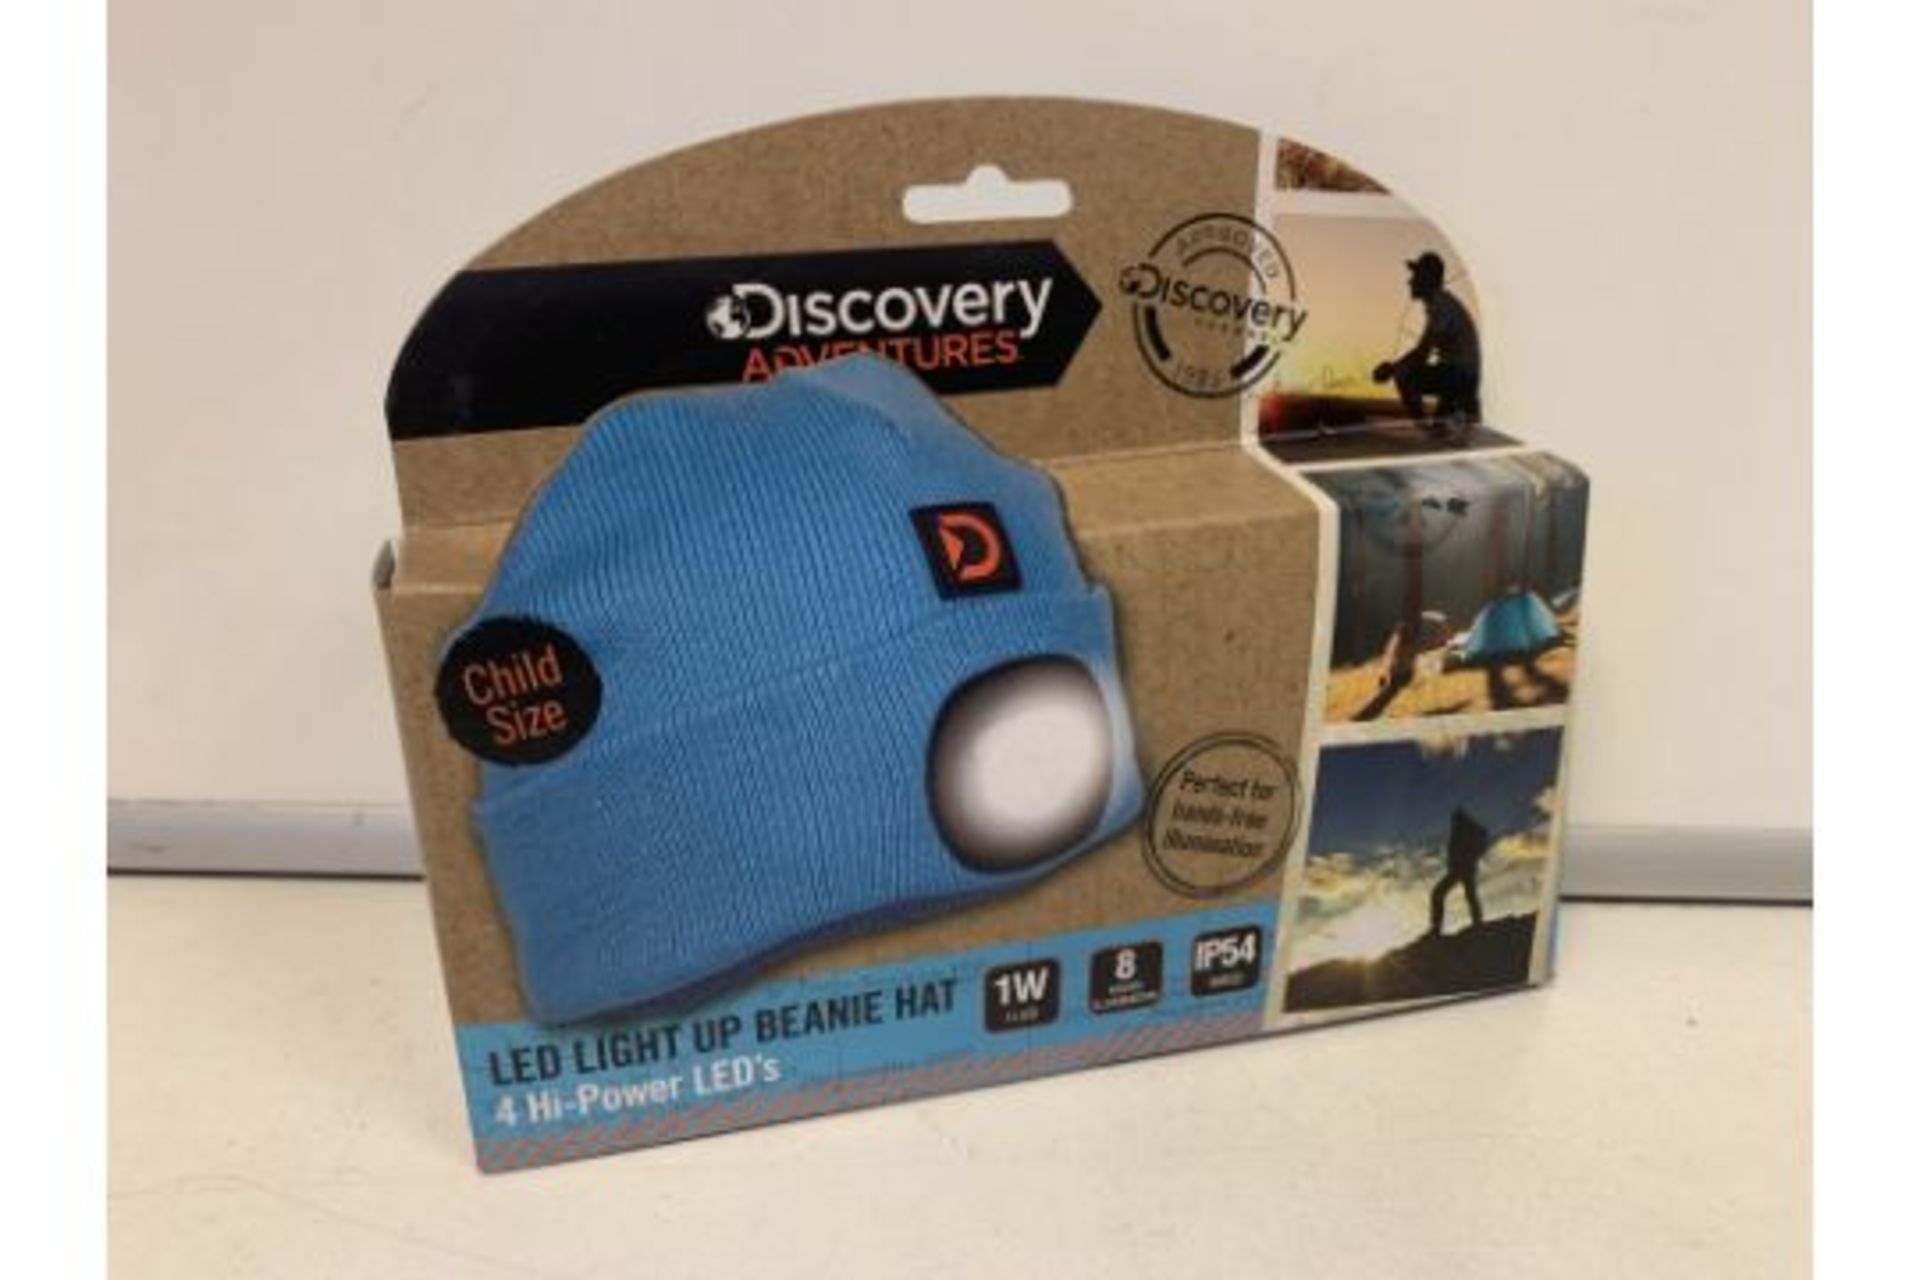 24 X NEW PACKAGED DISCOVERY CHANNEL LED LIGHT UP BEANIE HATS. 4 Hi-POWERED LED'S. UP TO 8 HOURS